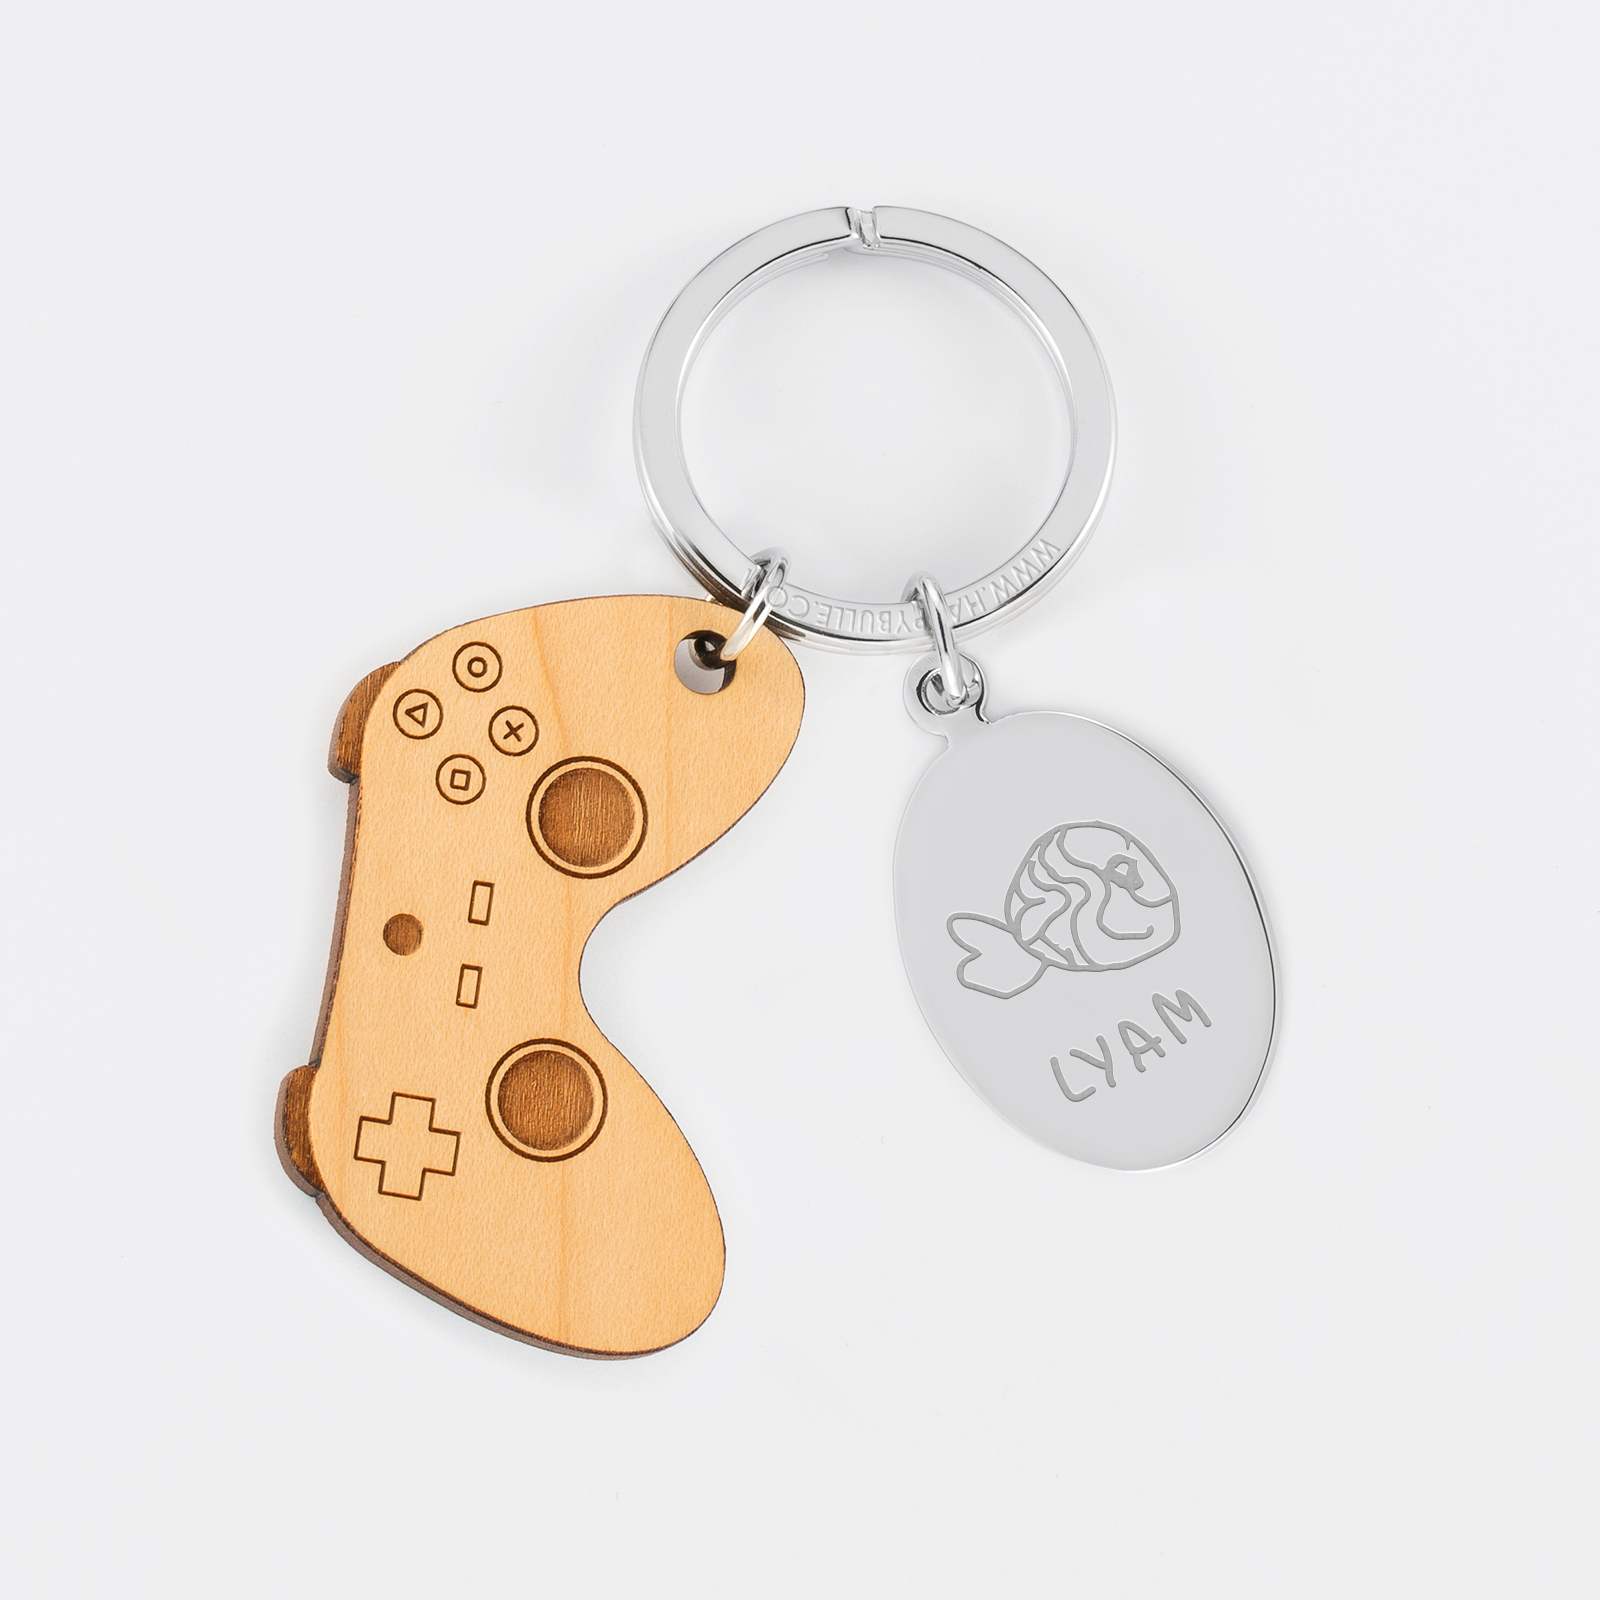 Personalised engraved oval steel medallion and wooden video game charm keyring - sketch